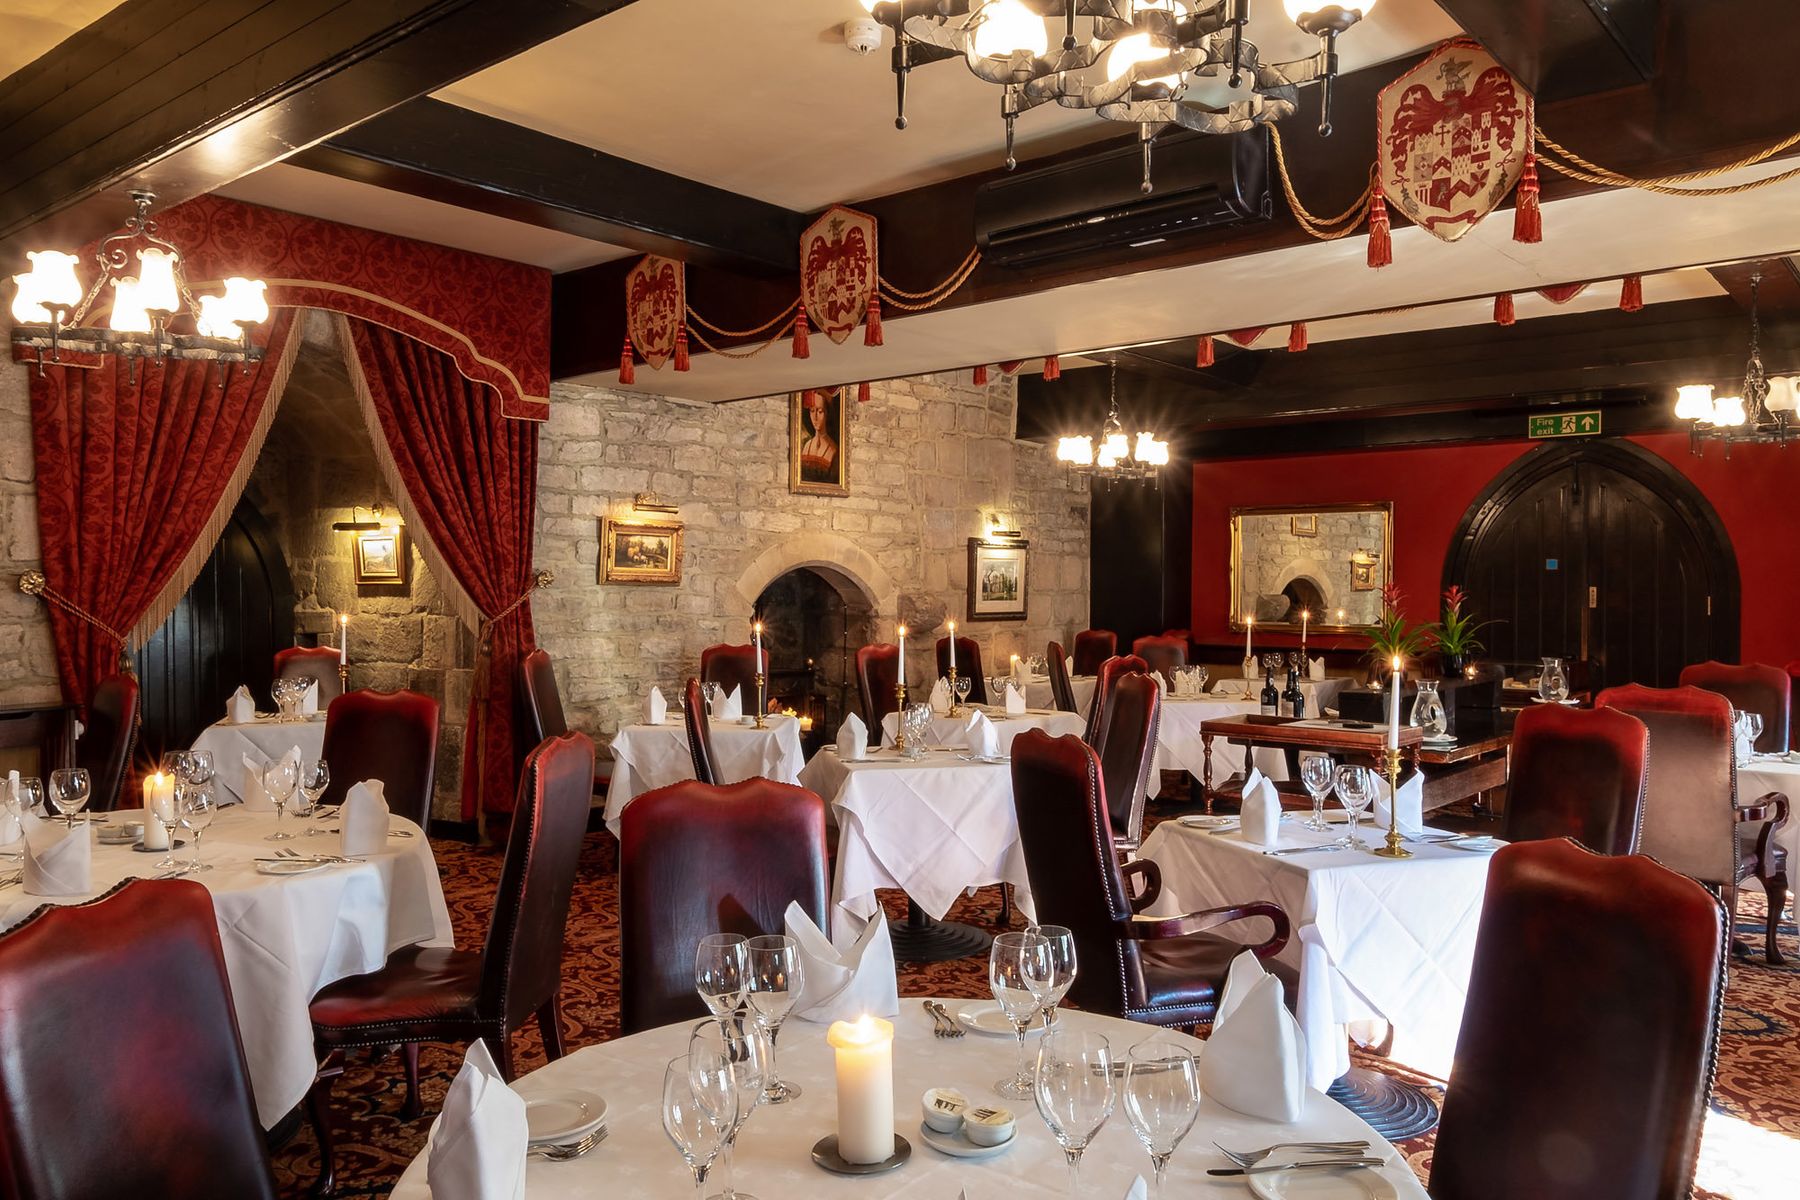 The Josephine dining room at Langley Castle Hotel, Northumberland, UK